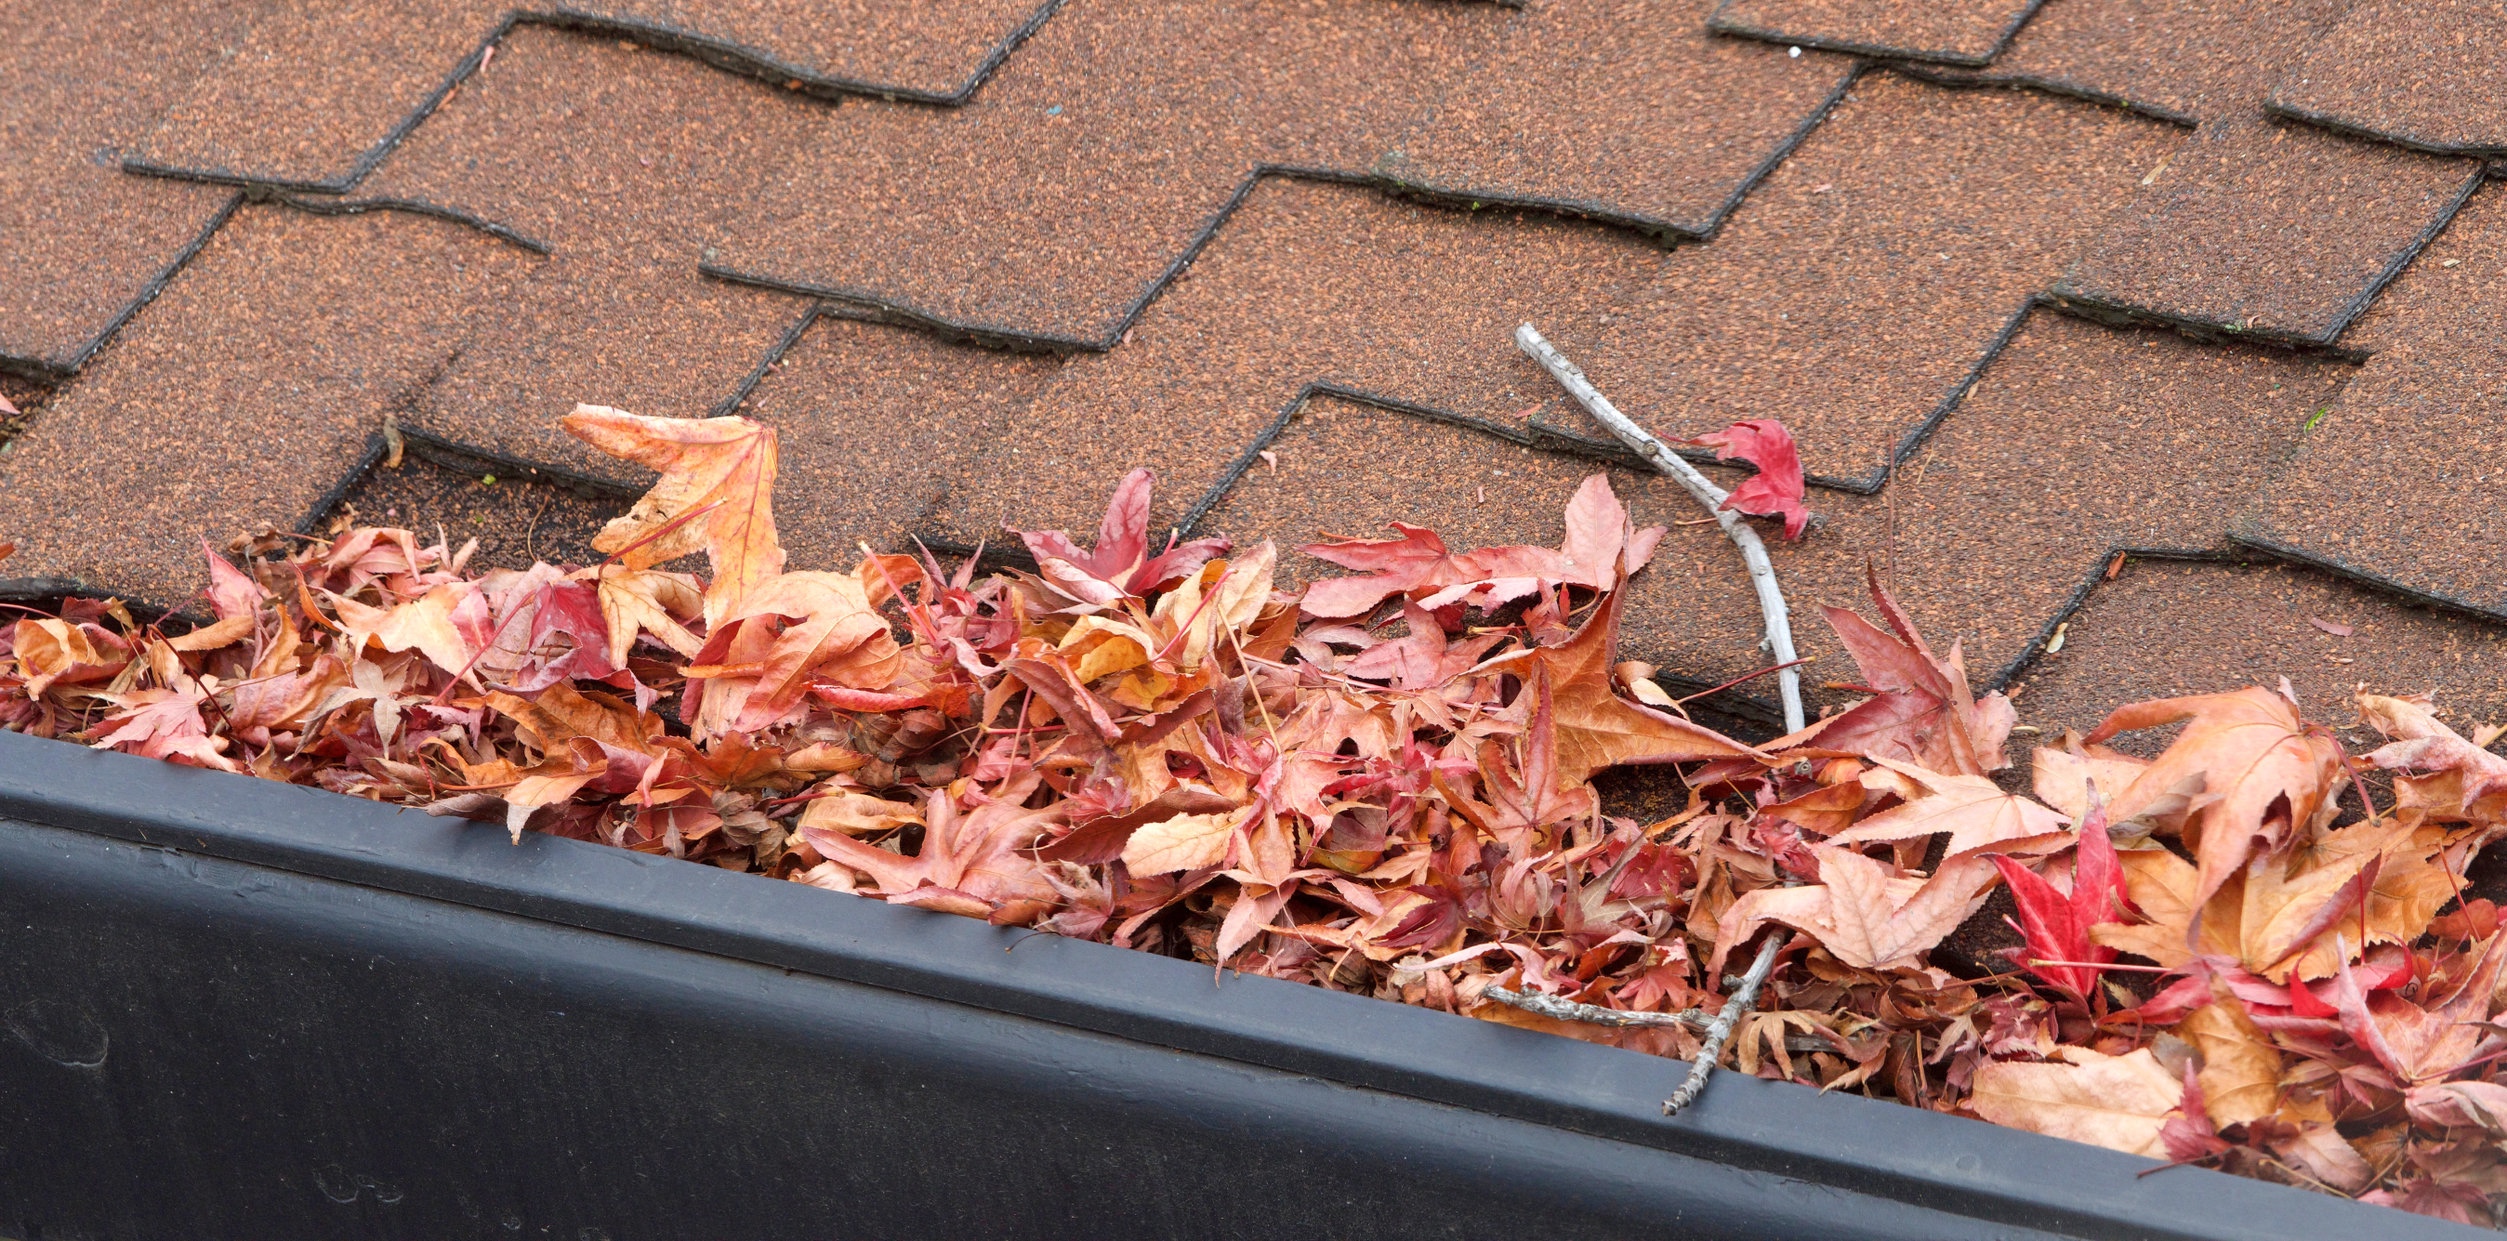 Rain gutters on roof without gutter guards, clogged with leaves, sticks and debris